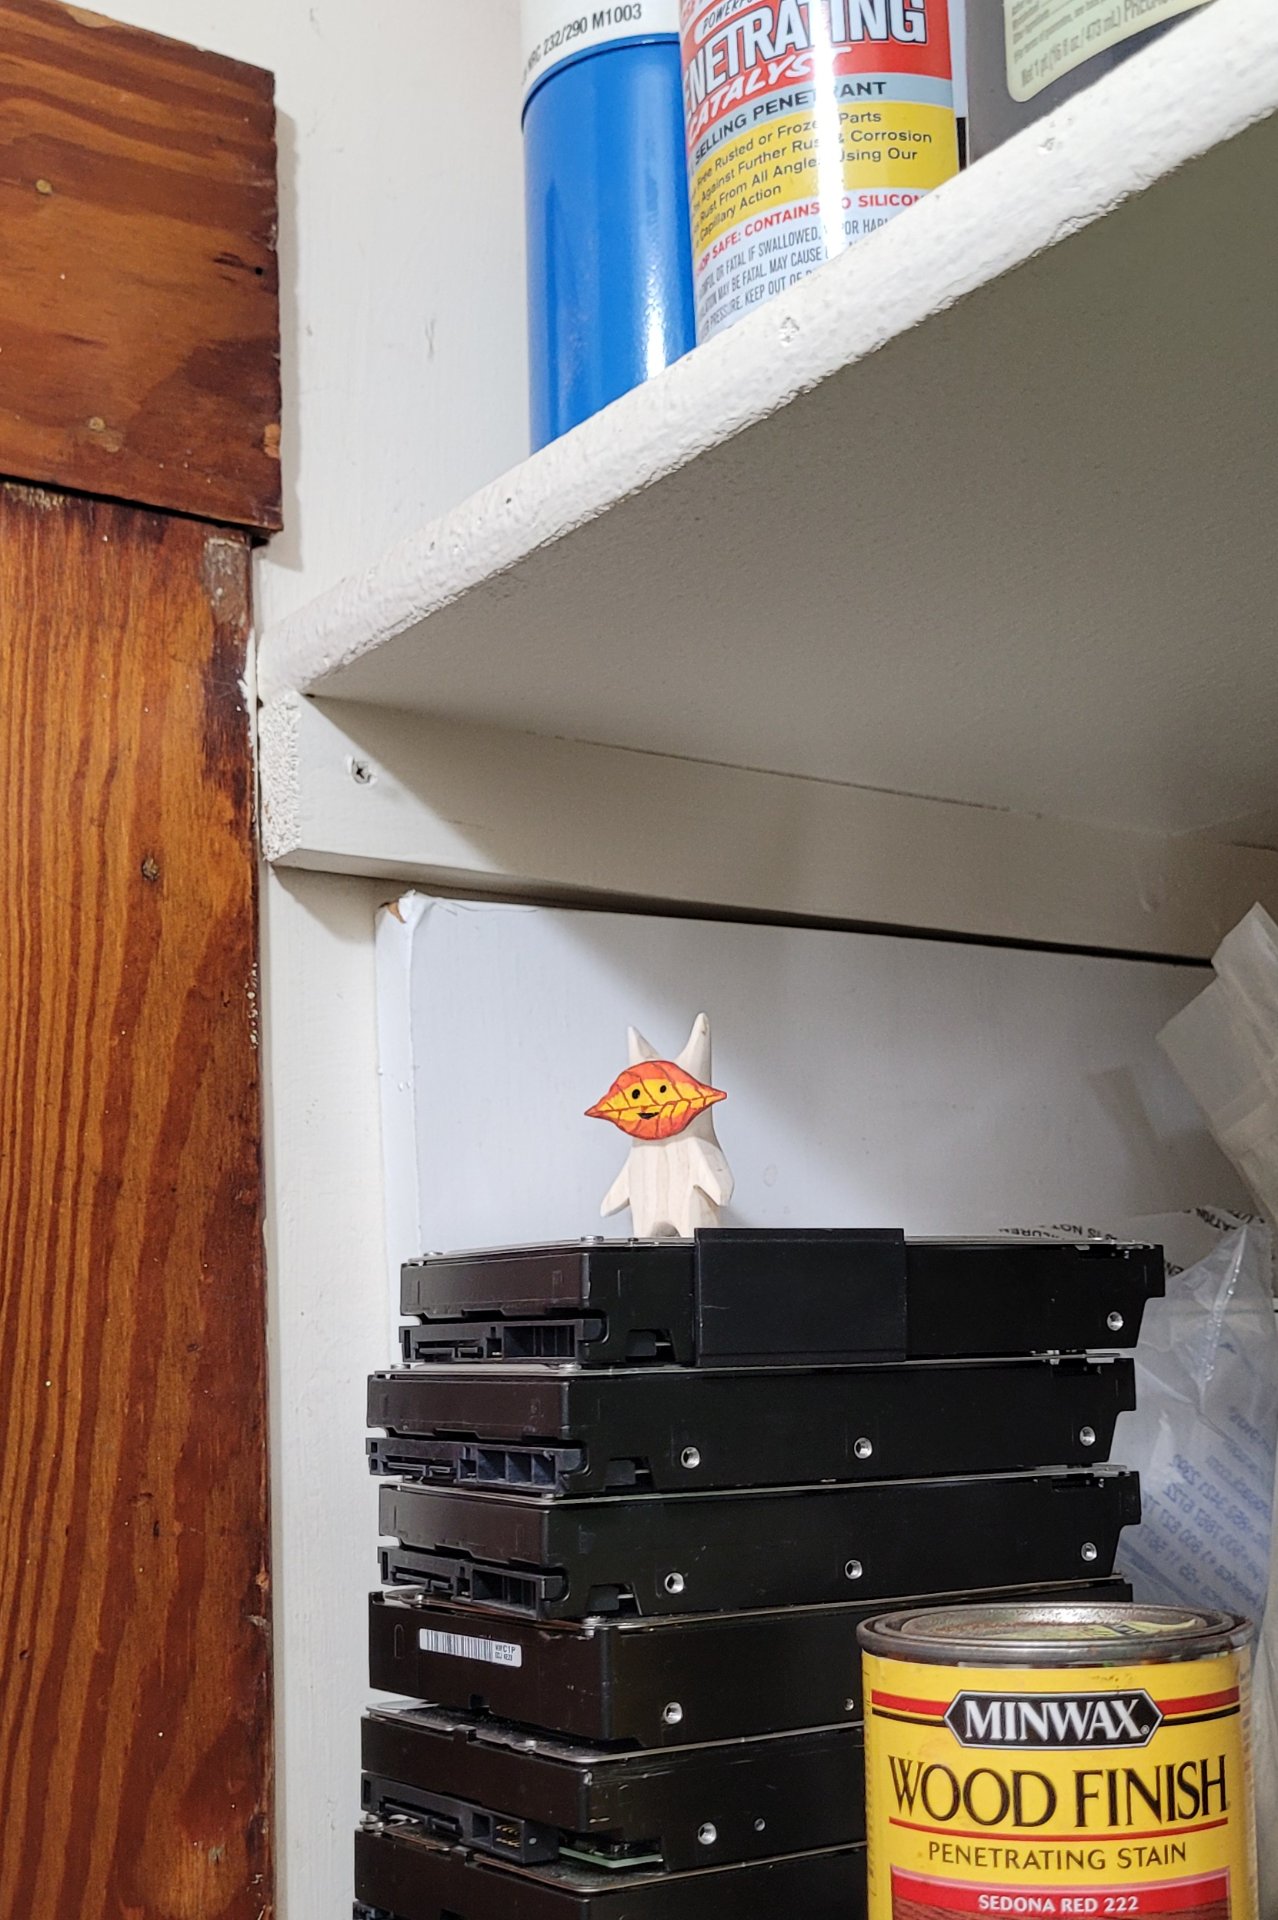 the finished korok hiding on top of a pile of hard drives on a shelf